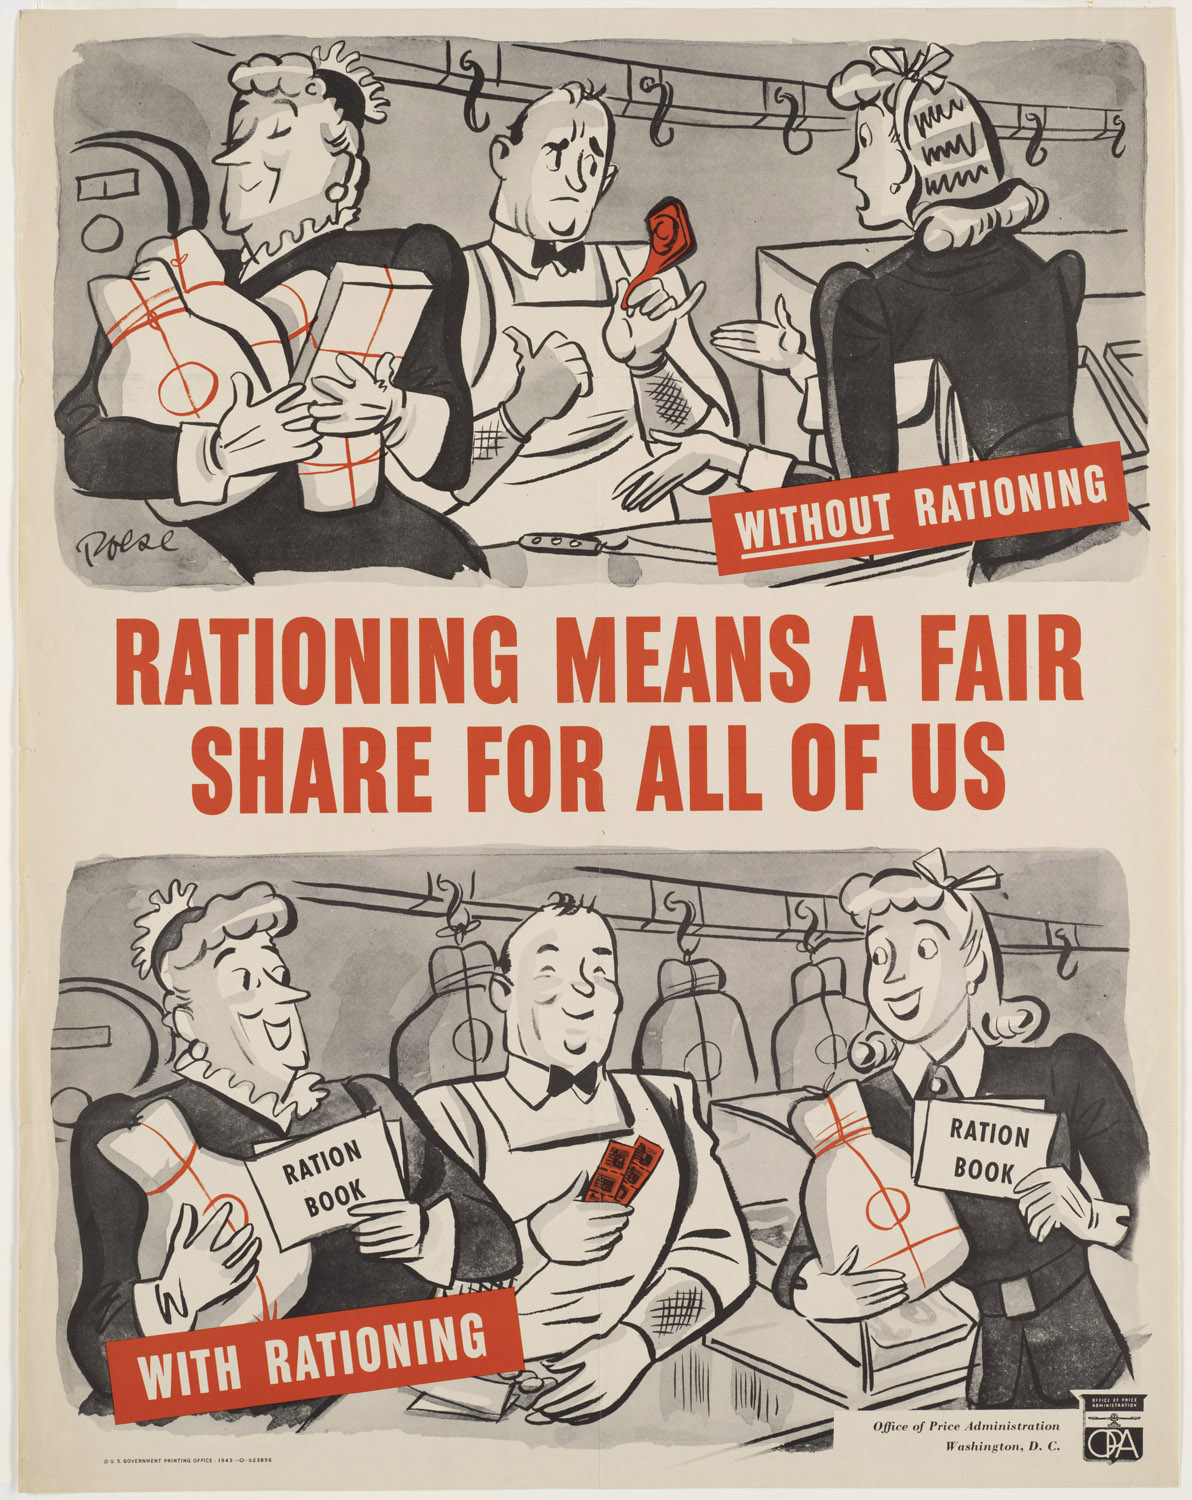 Rationing Means a Fair Share for Us All, U. S. Office of Price Administration, 1943. Courtesy of the Boston Public Library.